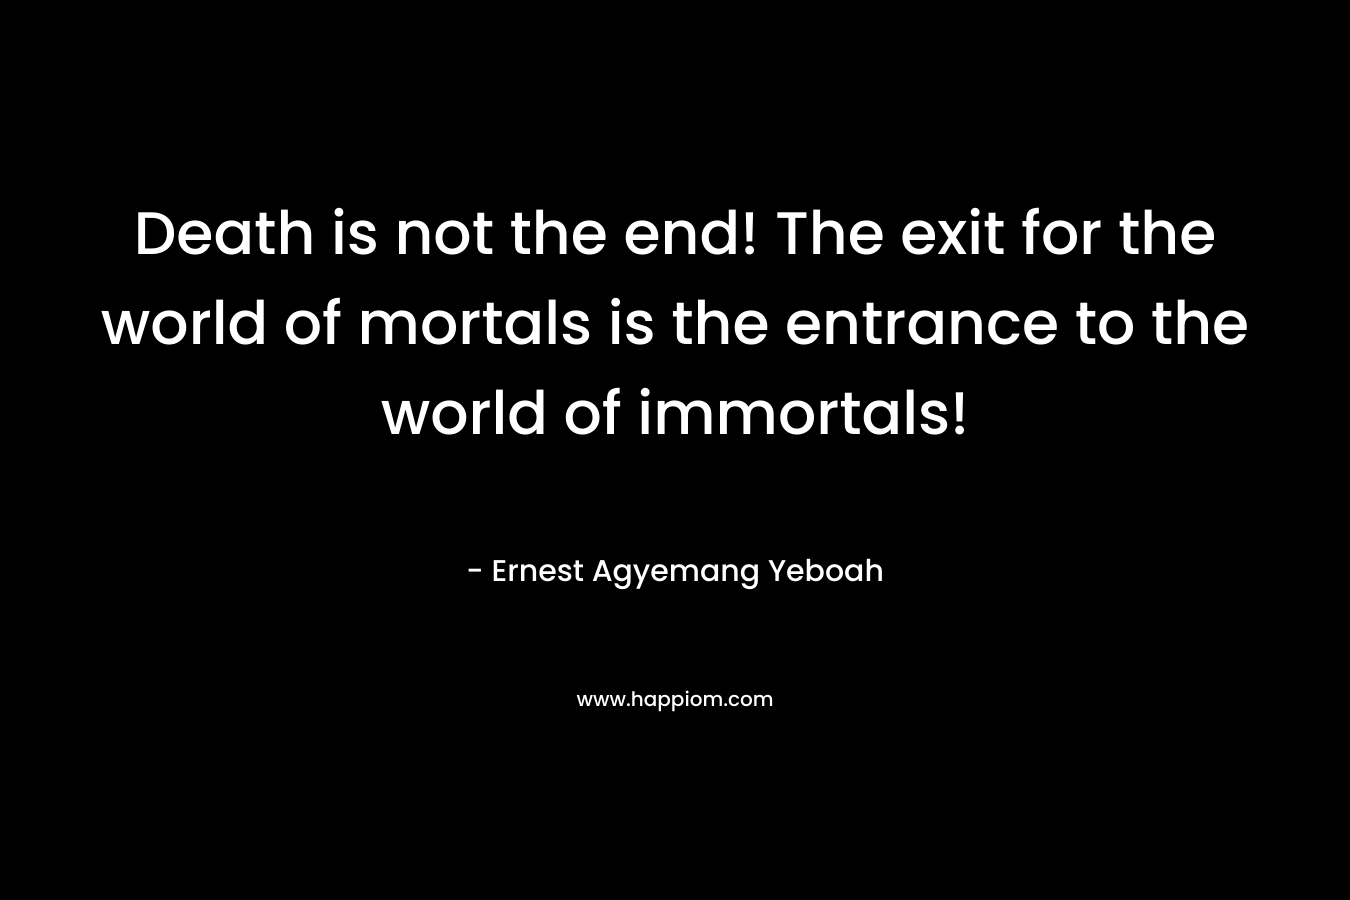 Death is not the end! The exit for the world of mortals is the entrance to the world of immortals! – Ernest Agyemang Yeboah